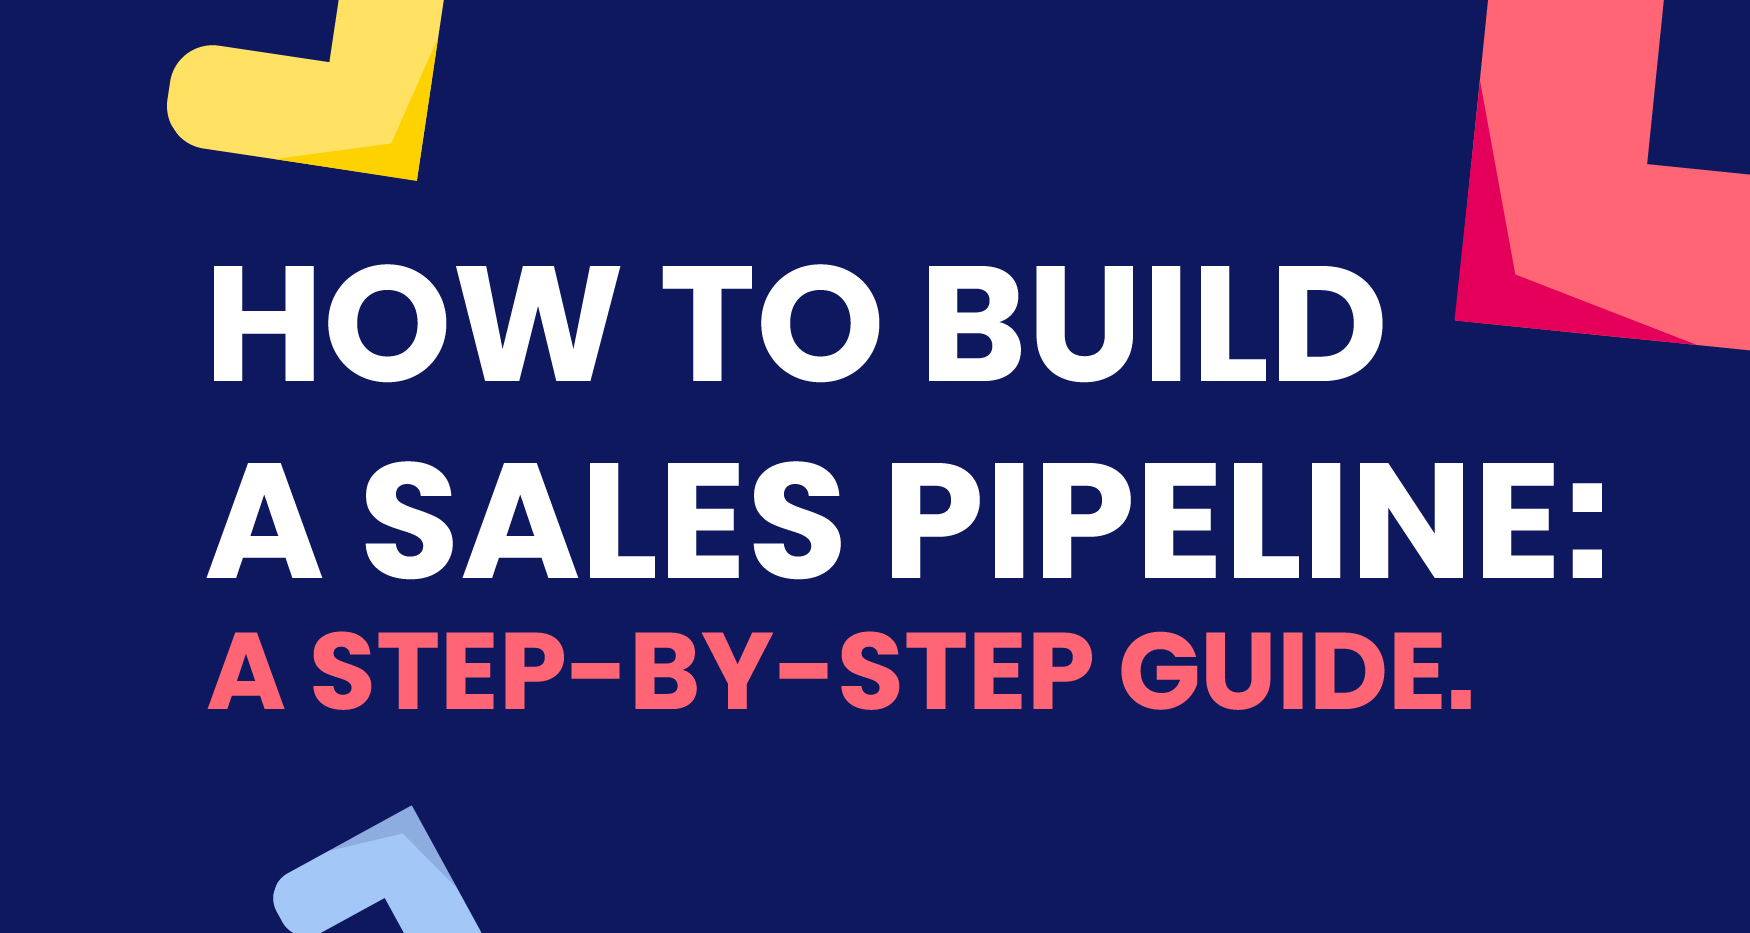 How to Build a Sales Pipeline: A Step-By-Step Guide